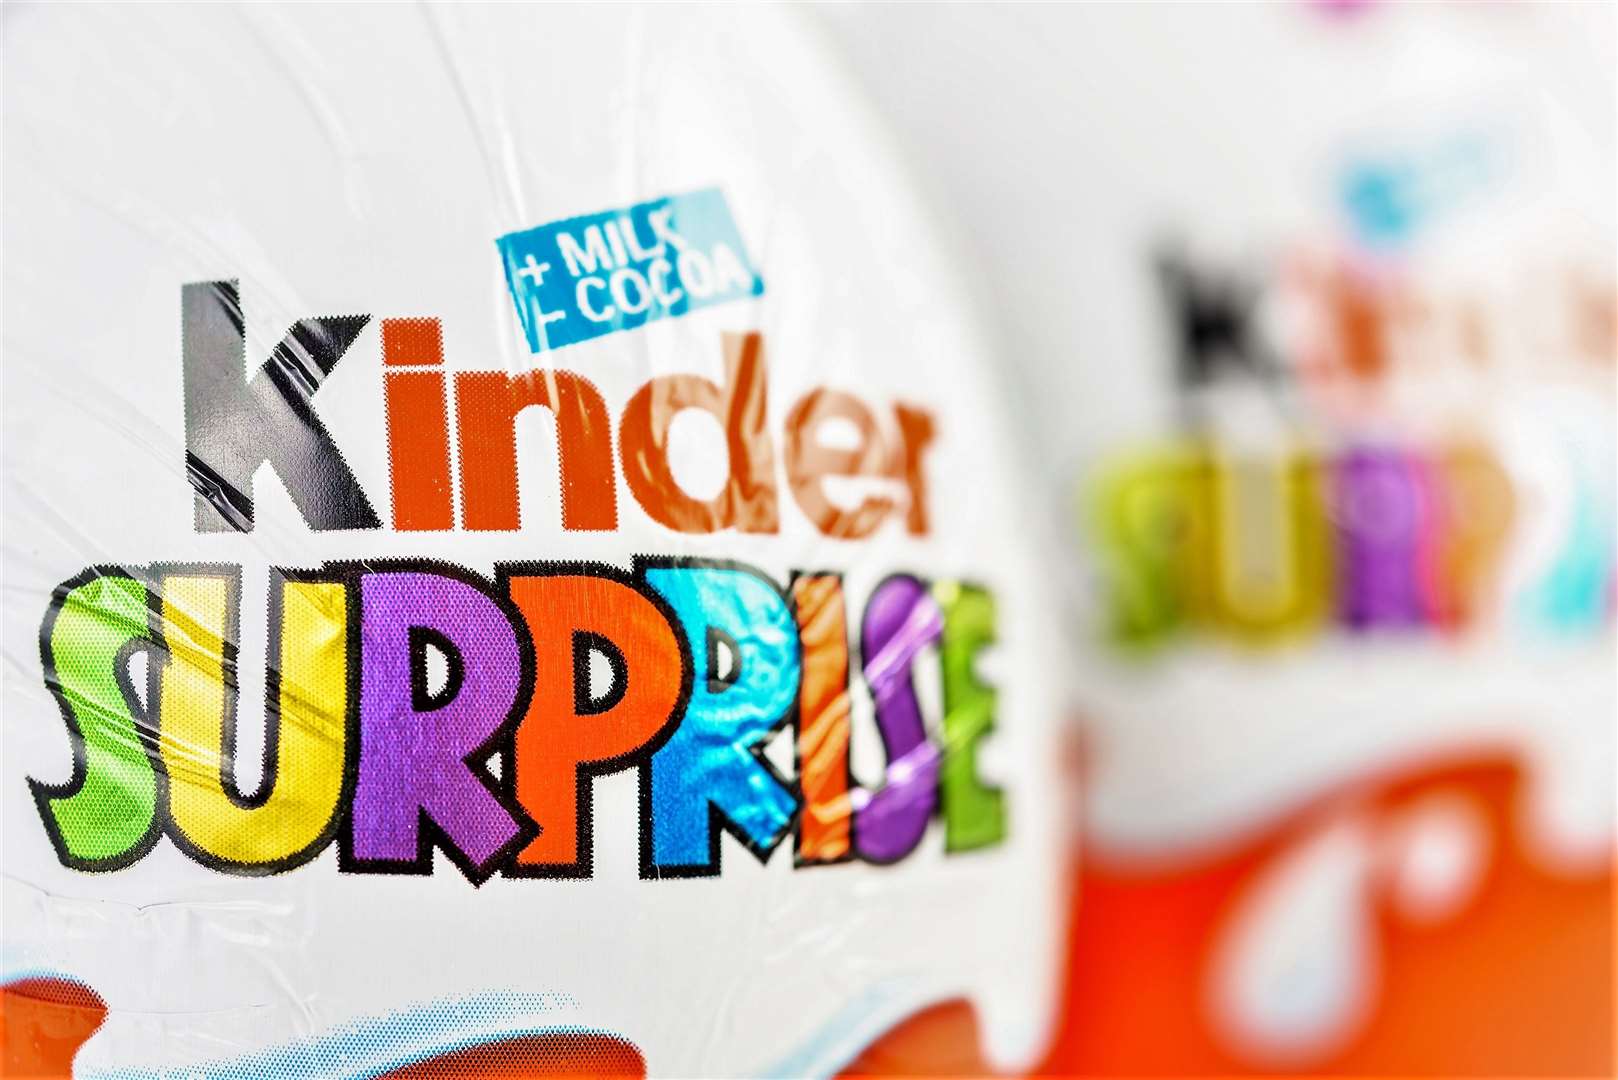 Kinder Surprise Chocolate Eggs are a confection manufactured by Ferrero company and has the form of a chocolate egg containing a small toy. Picture: Adobe Stock